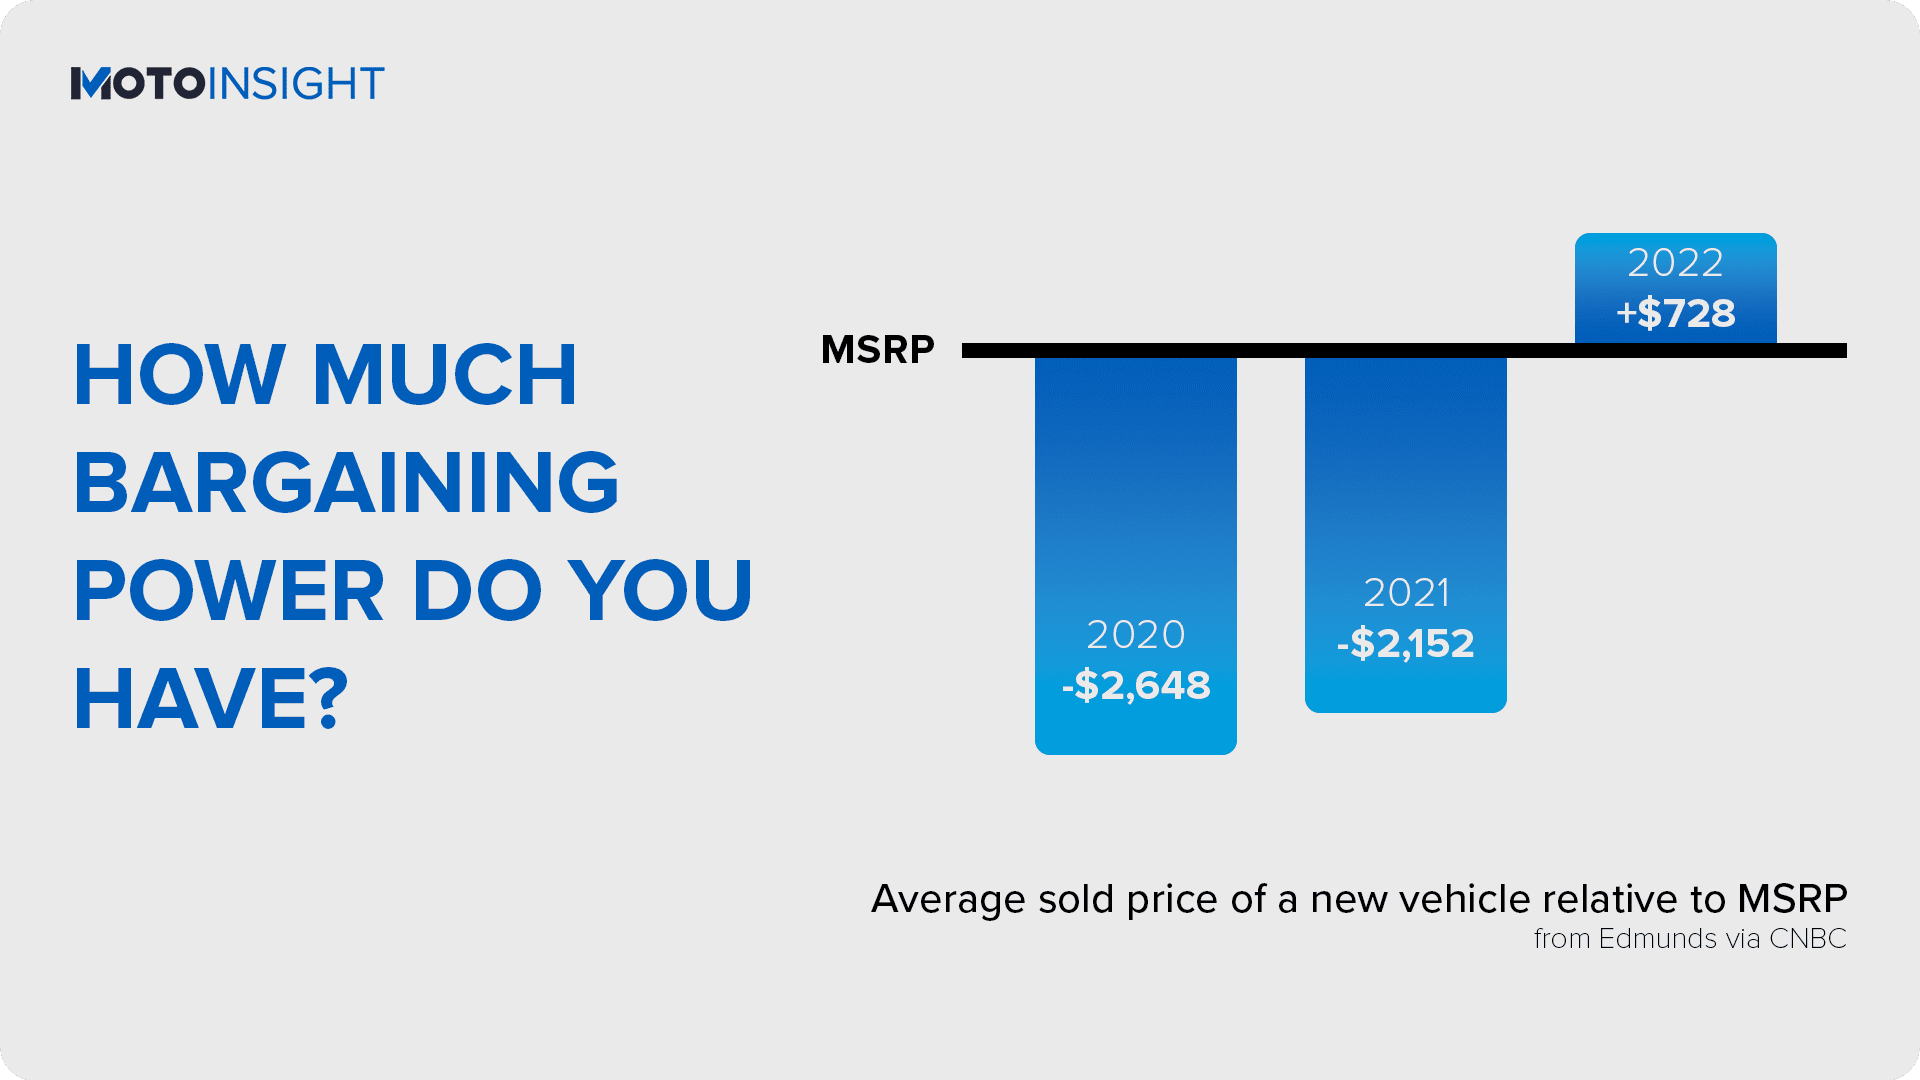 HOW MUCH BARGAINING POWER DO YOU HAVE? average sold vehicle price vs MSRP